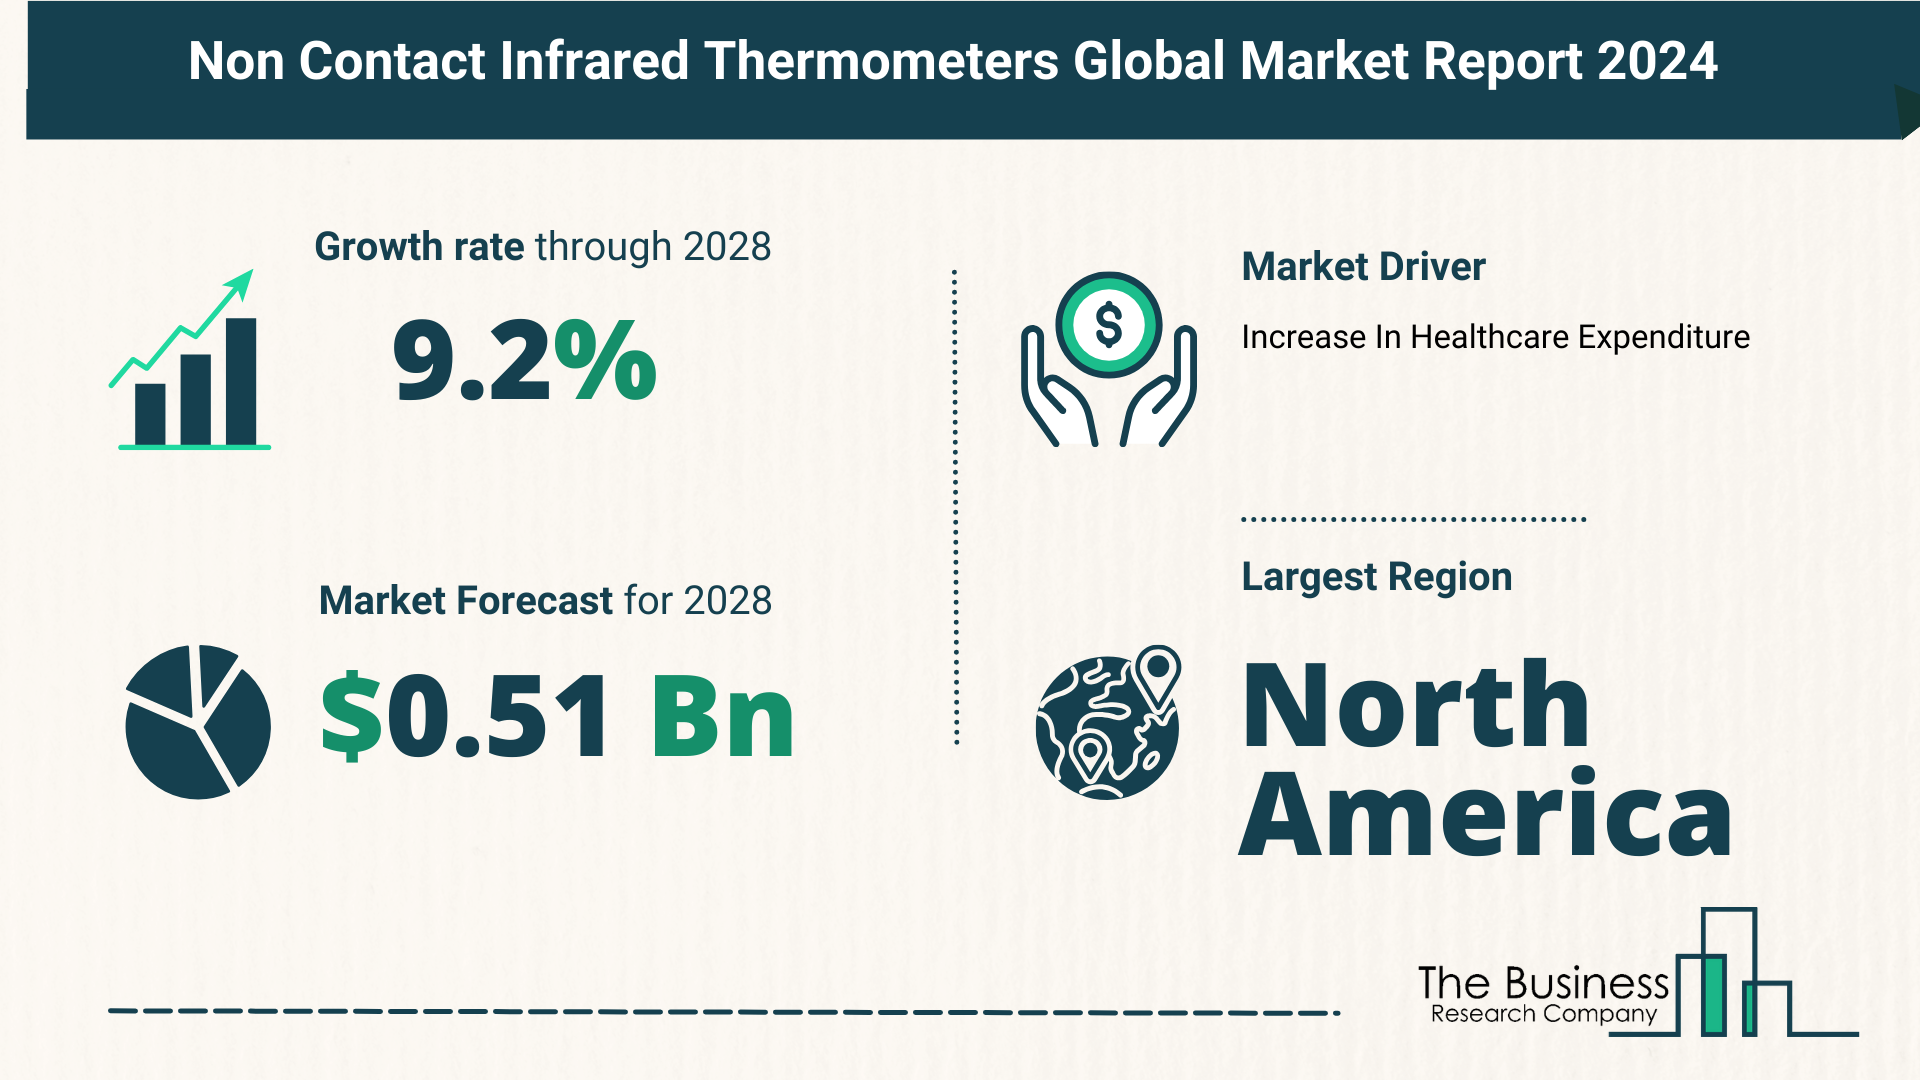 Global Non Contact Infrared Thermometers Market